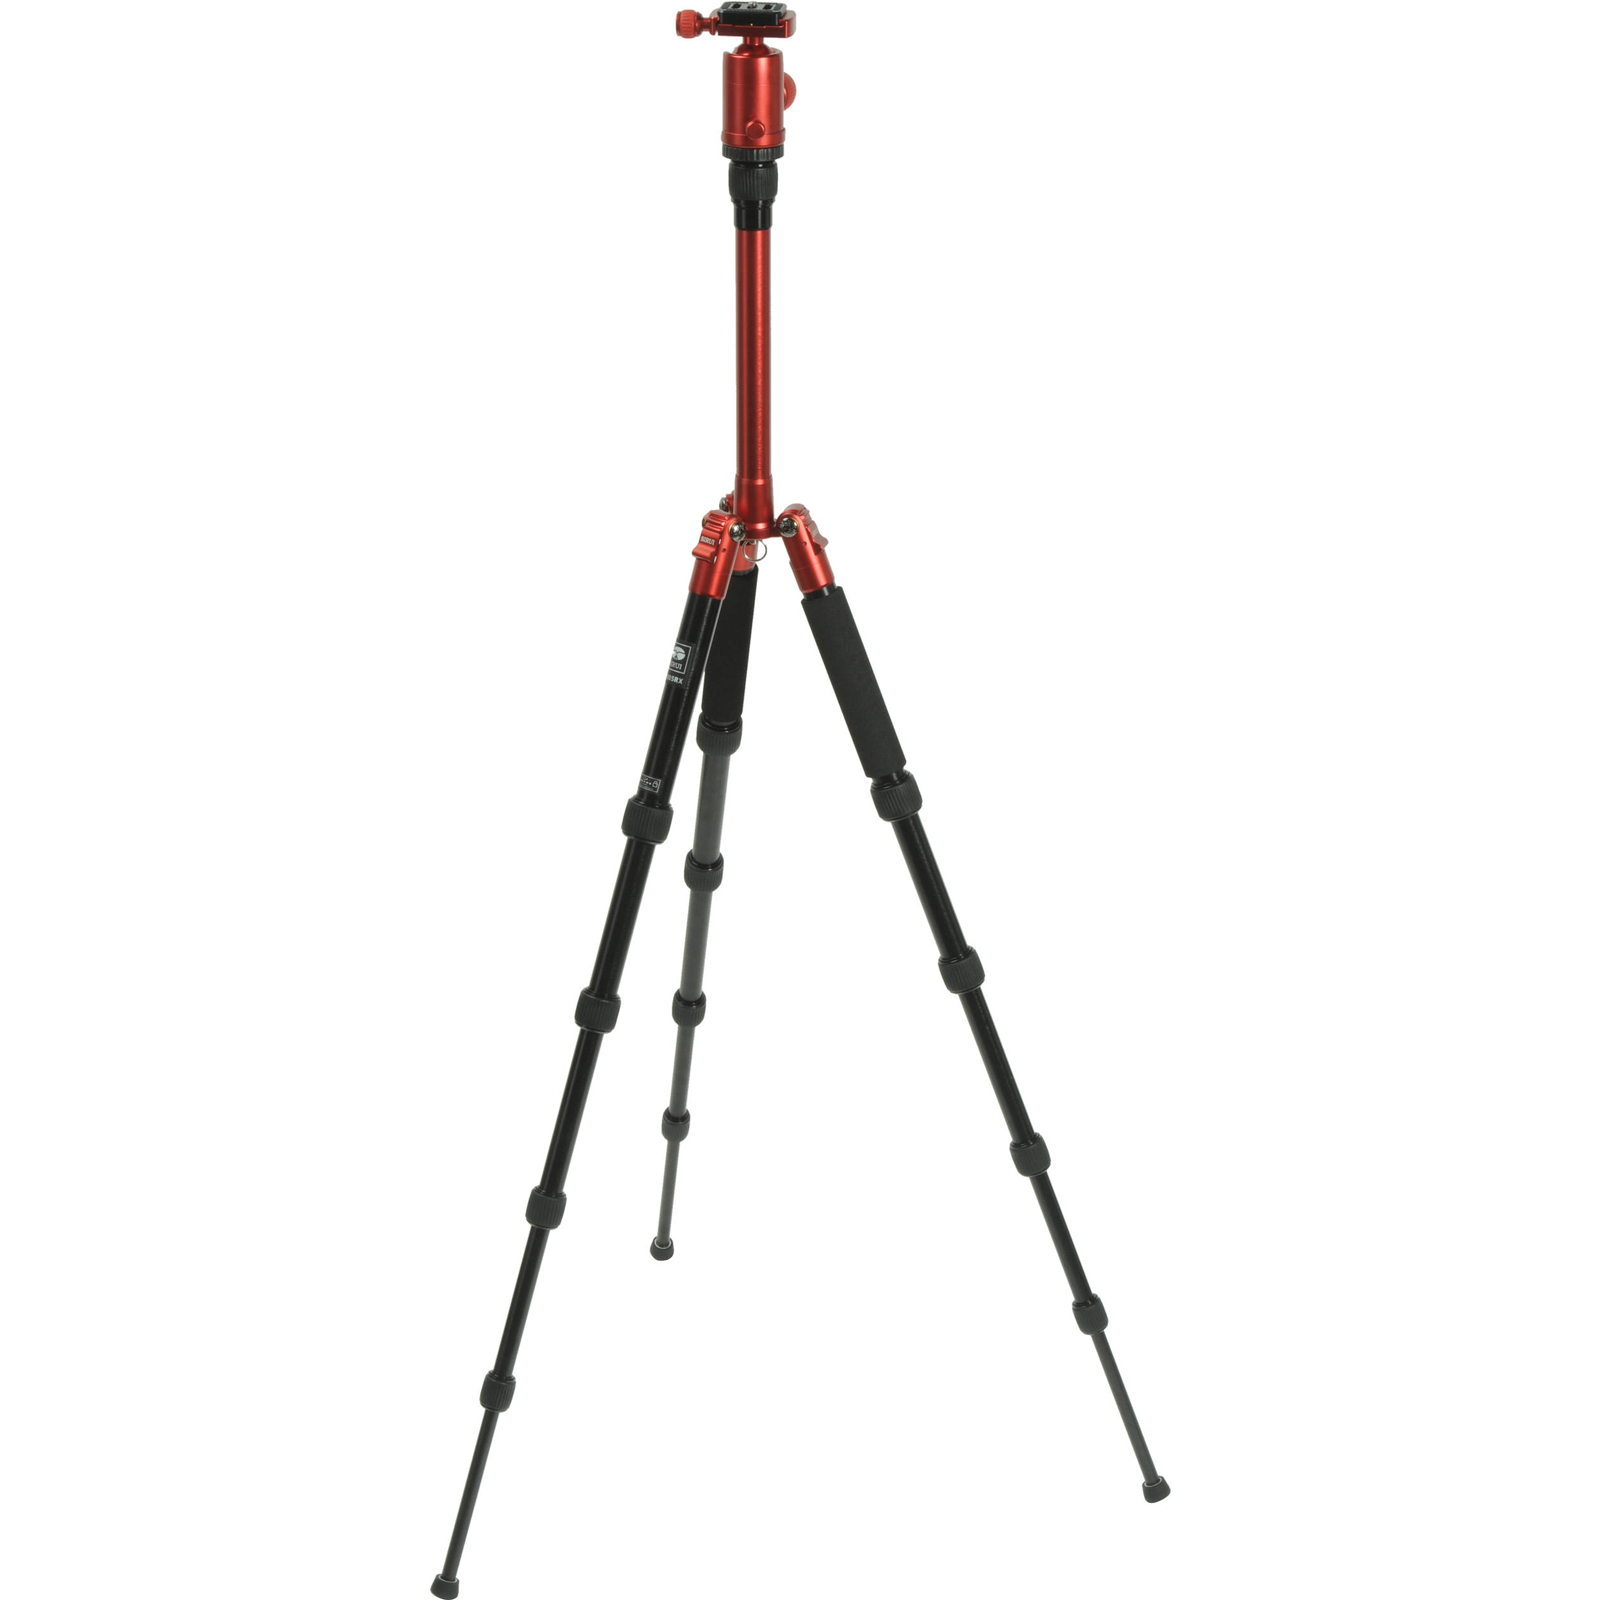 Sirui T-005X 54" Aluminum Alloy Tripod with C-10X Ball Head & Case (Red) - image 3 of 4